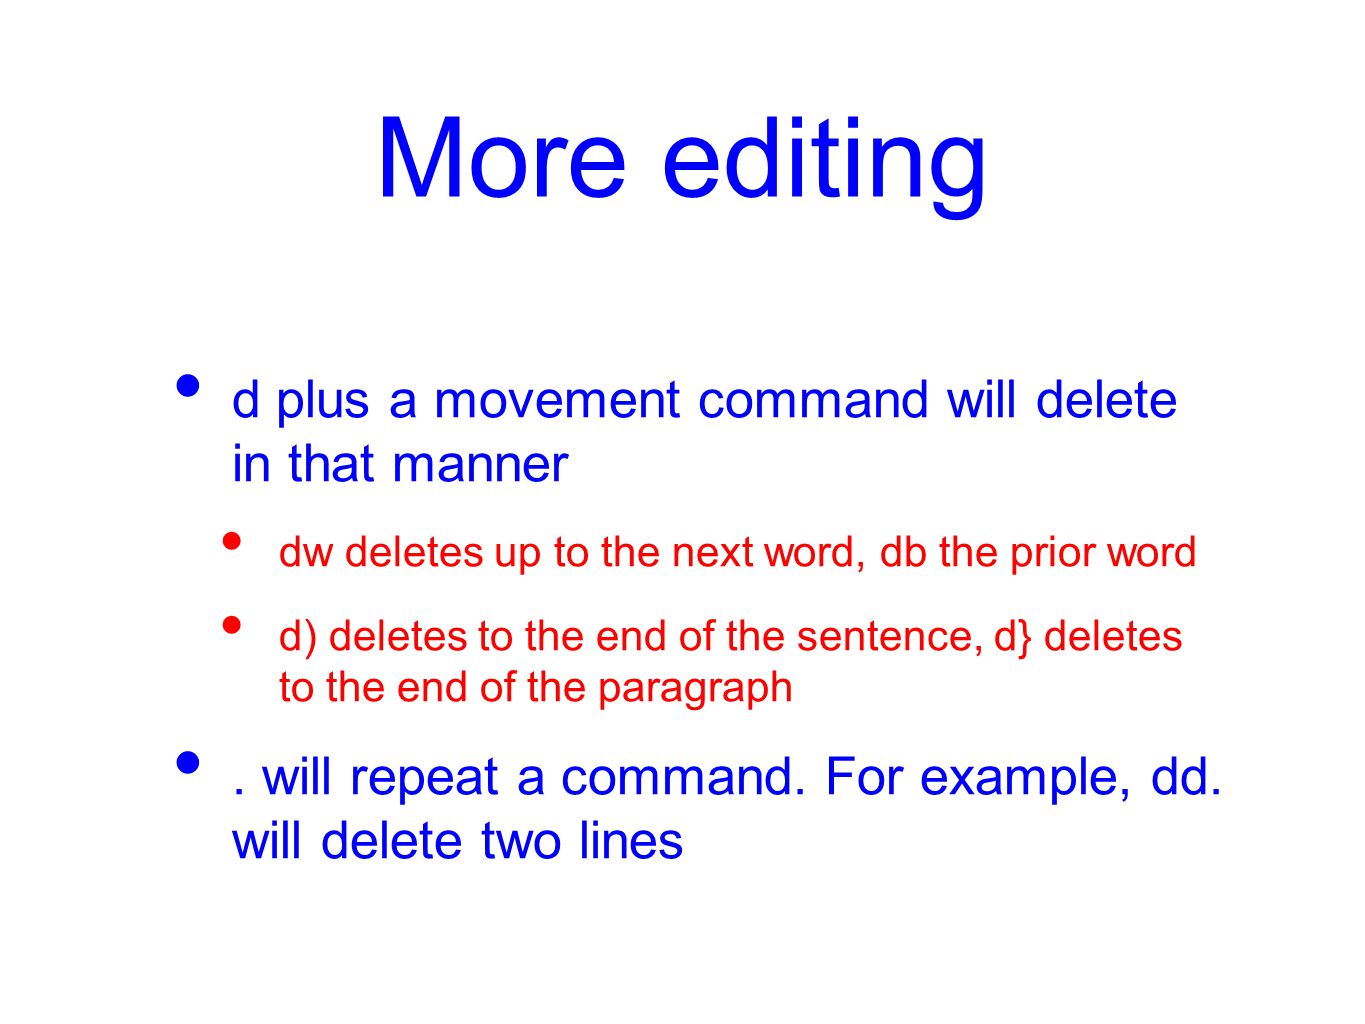 More editing d plus a movement command will delete in that manner dw deletes up to the next word, db the prior word d) deletes to the end of the sentence, d} deletes to the end of the paragraph.